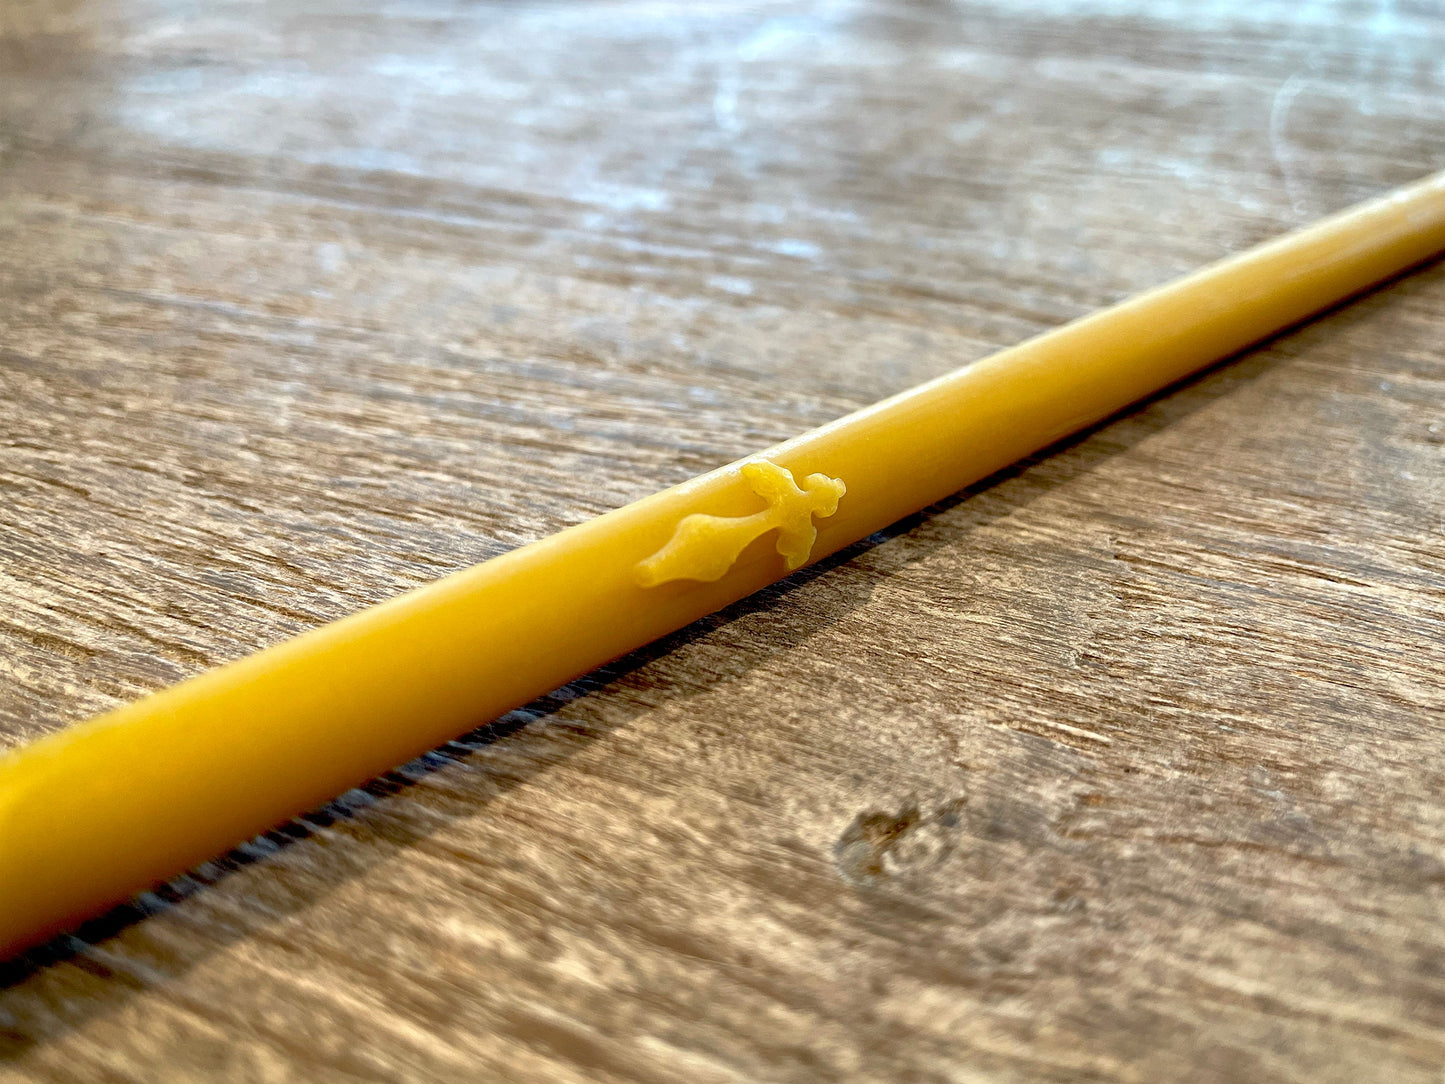 10 Memorial Beeswax Tapers (Thin 10in)